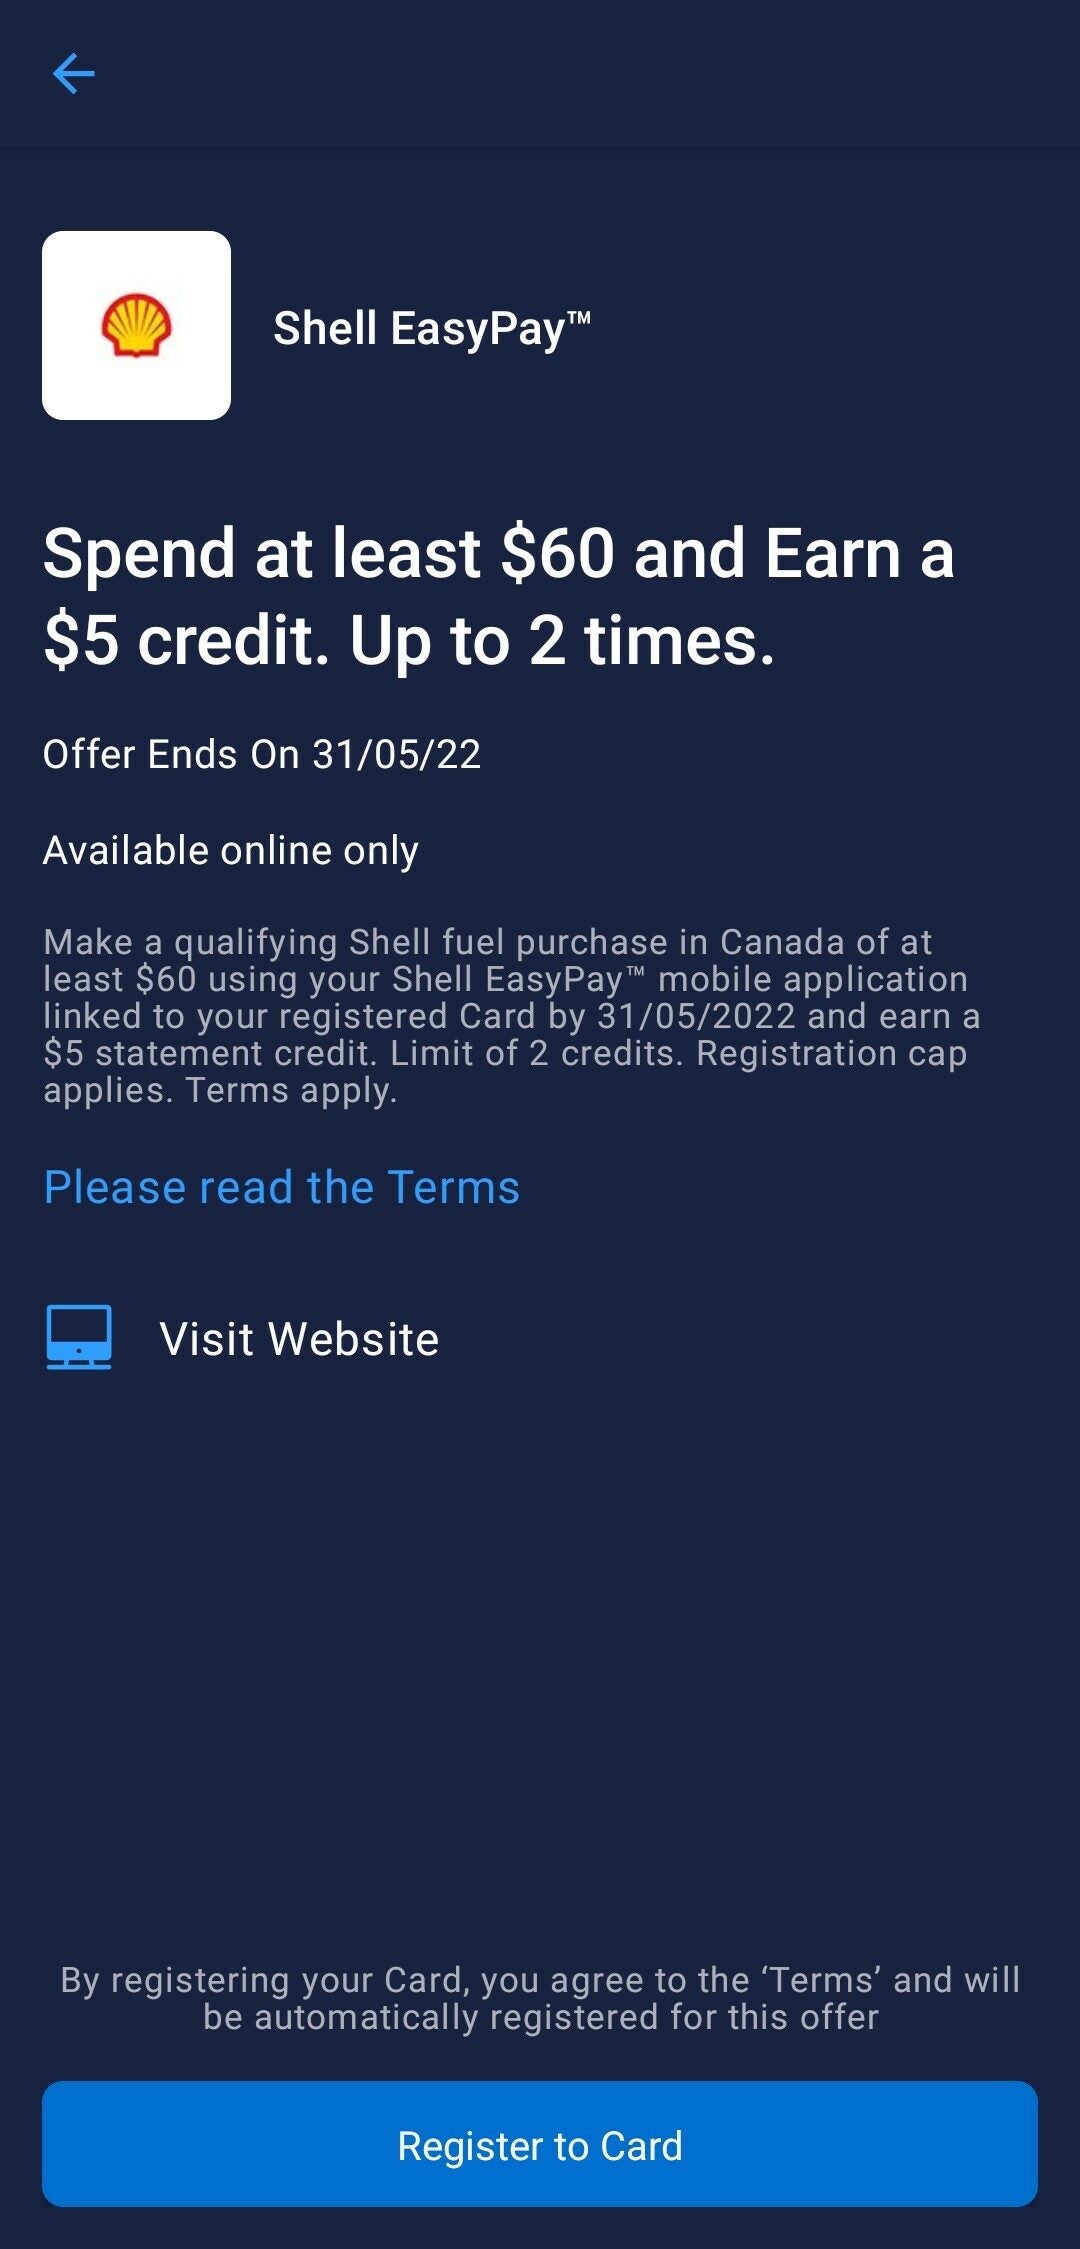 American Express] [Shell Gas] Spend at least $60 and Earn a $5 credit at  Shell. Up to 2 or 4 times.  Forums